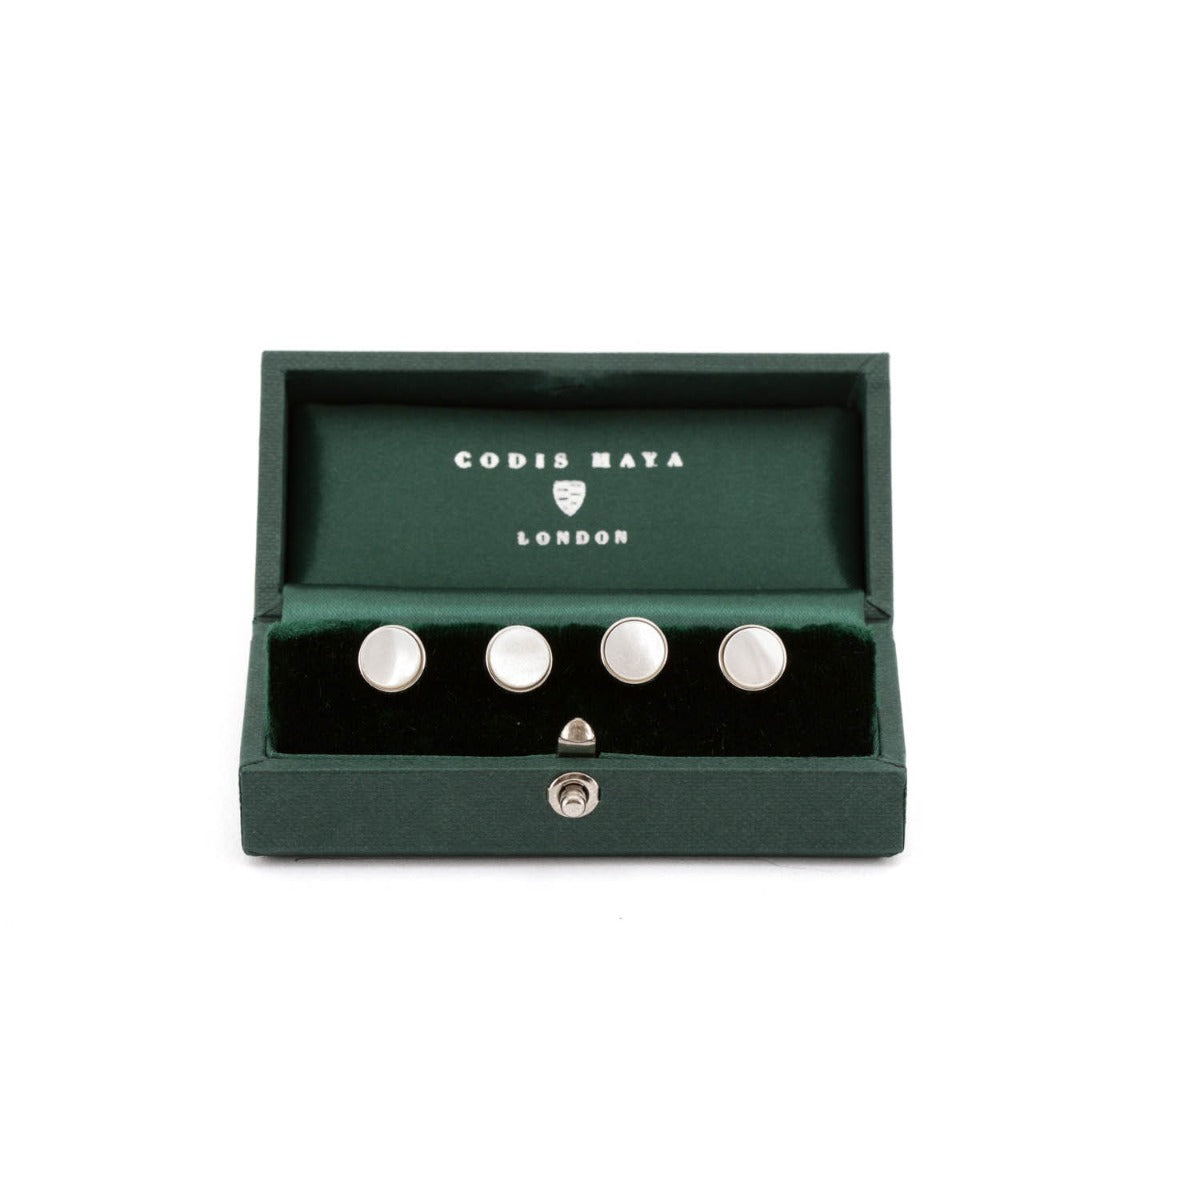 A set of Rhodium Plated Mother of Pearl Stud Set cufflinks in a green box from KirbyAllison.com.